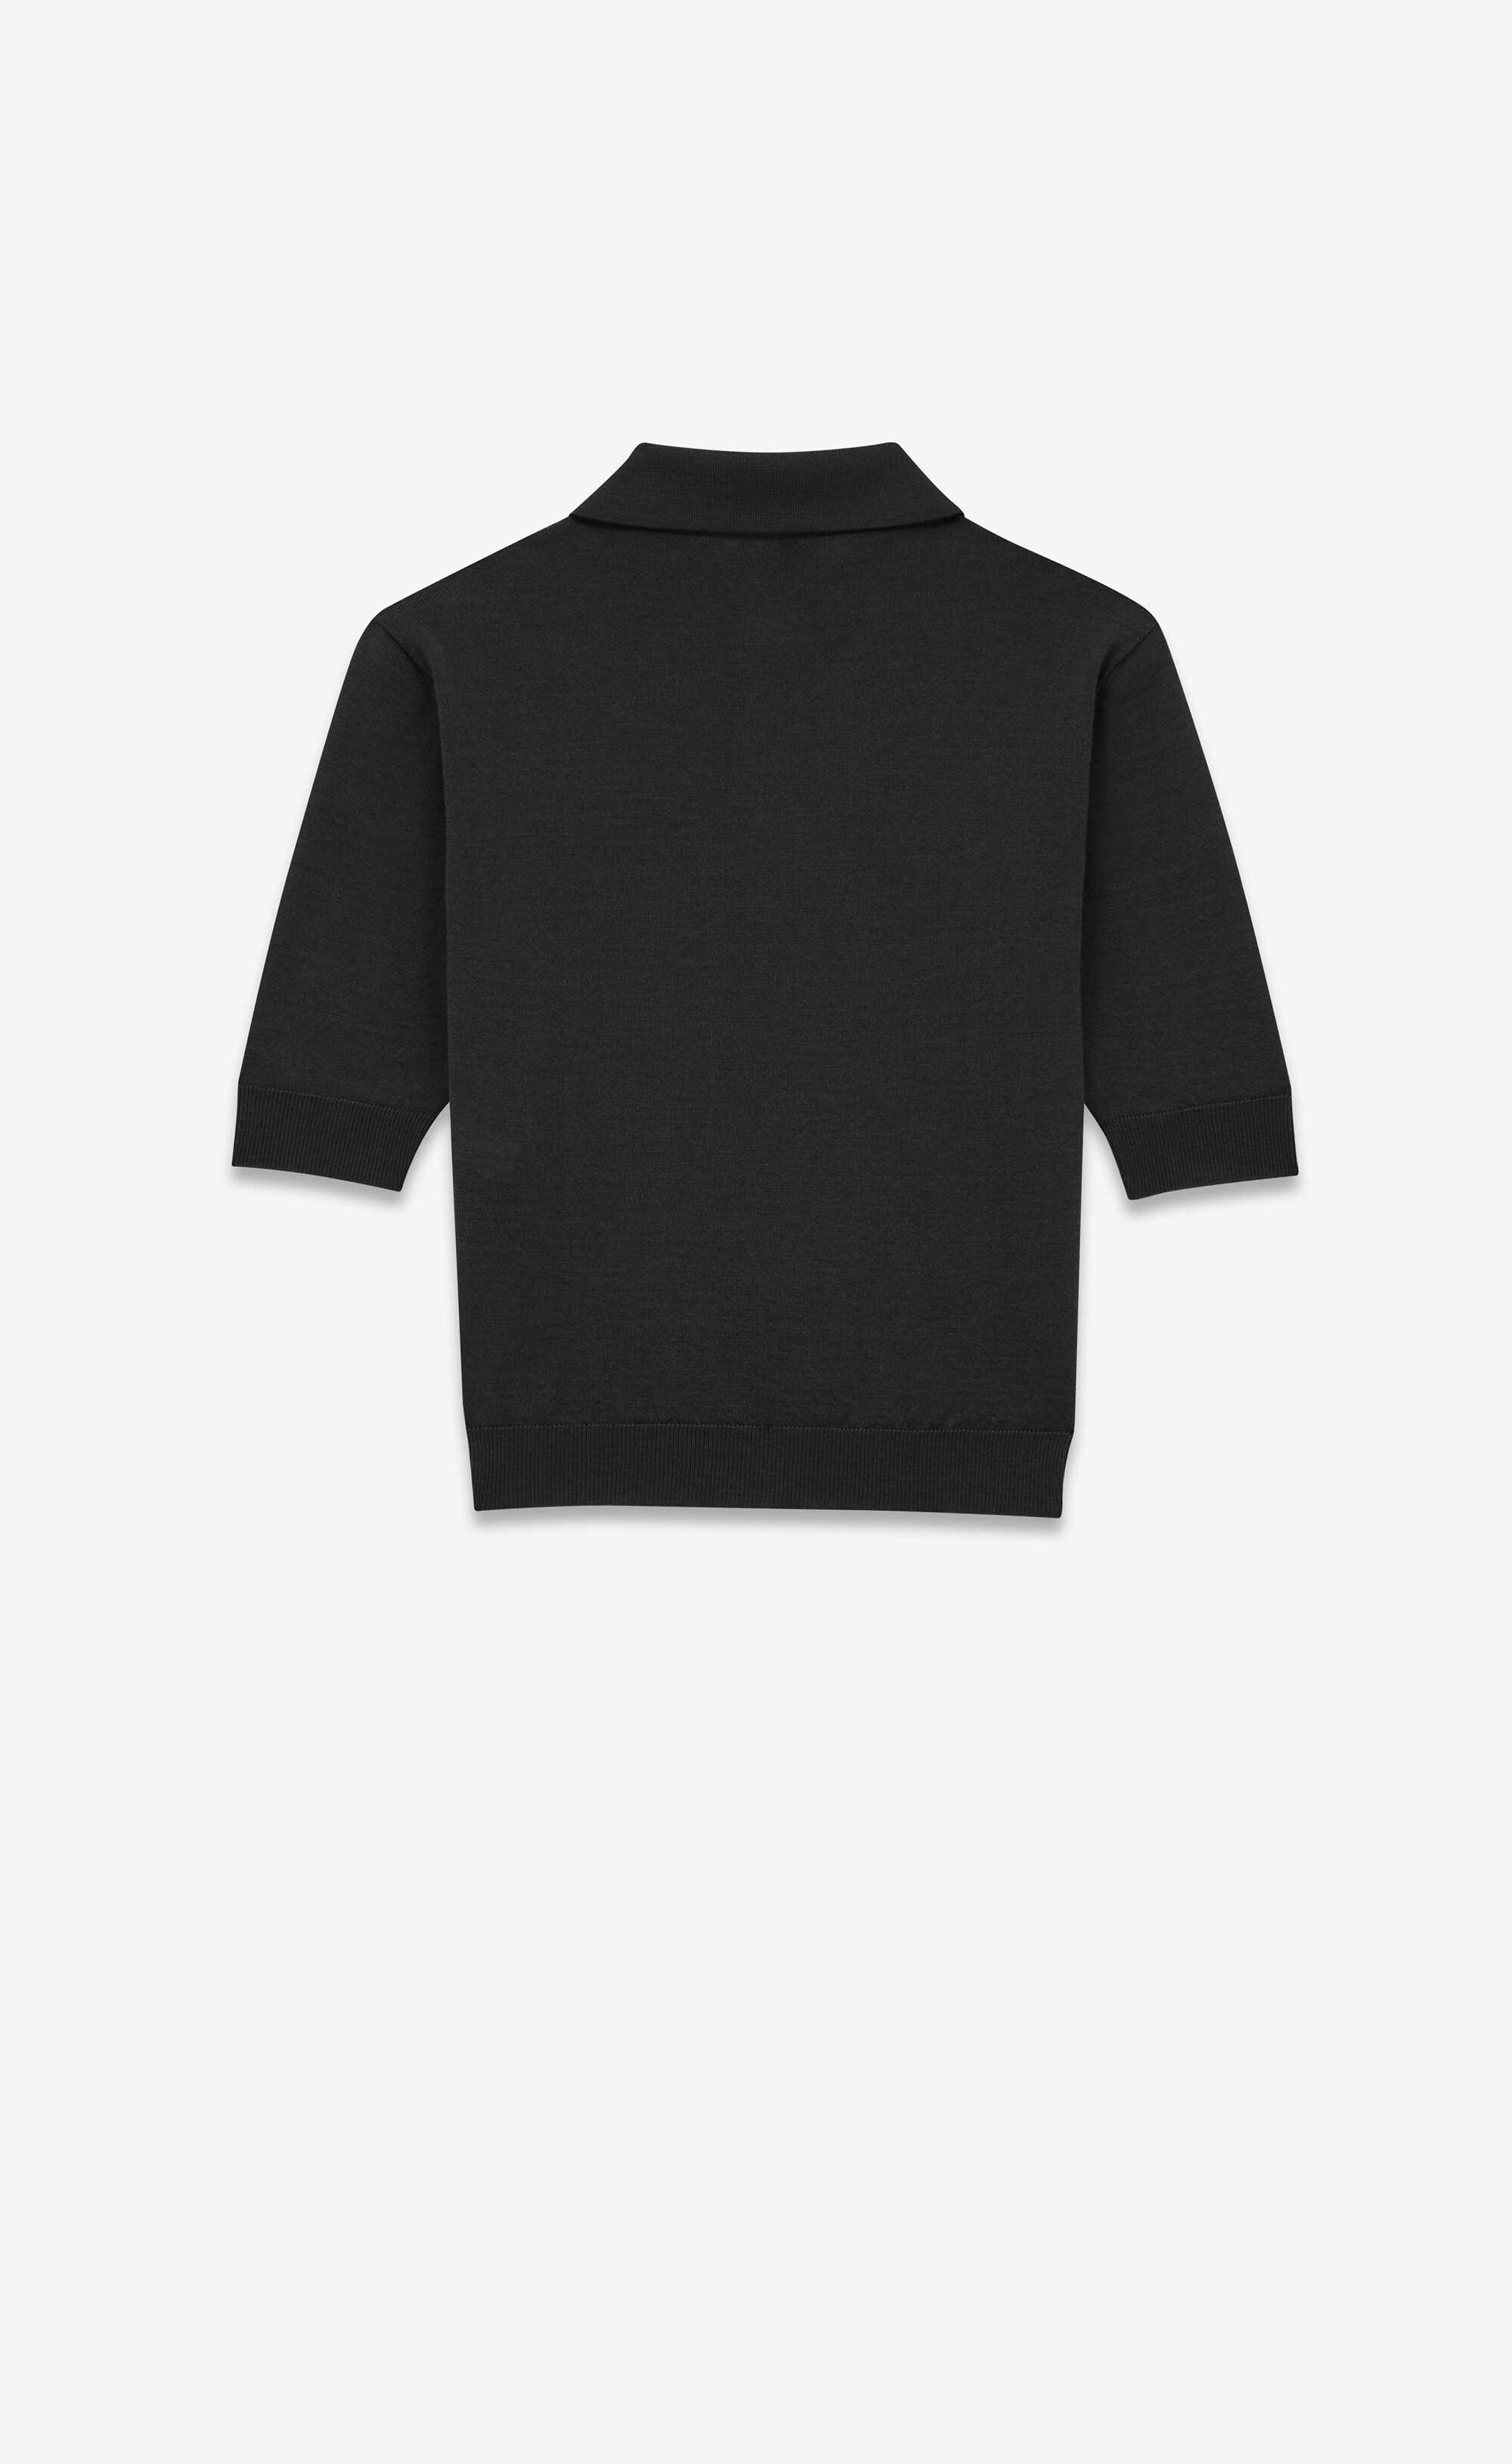 cassandre polo shirt in cashmere, wool, and silk - 2